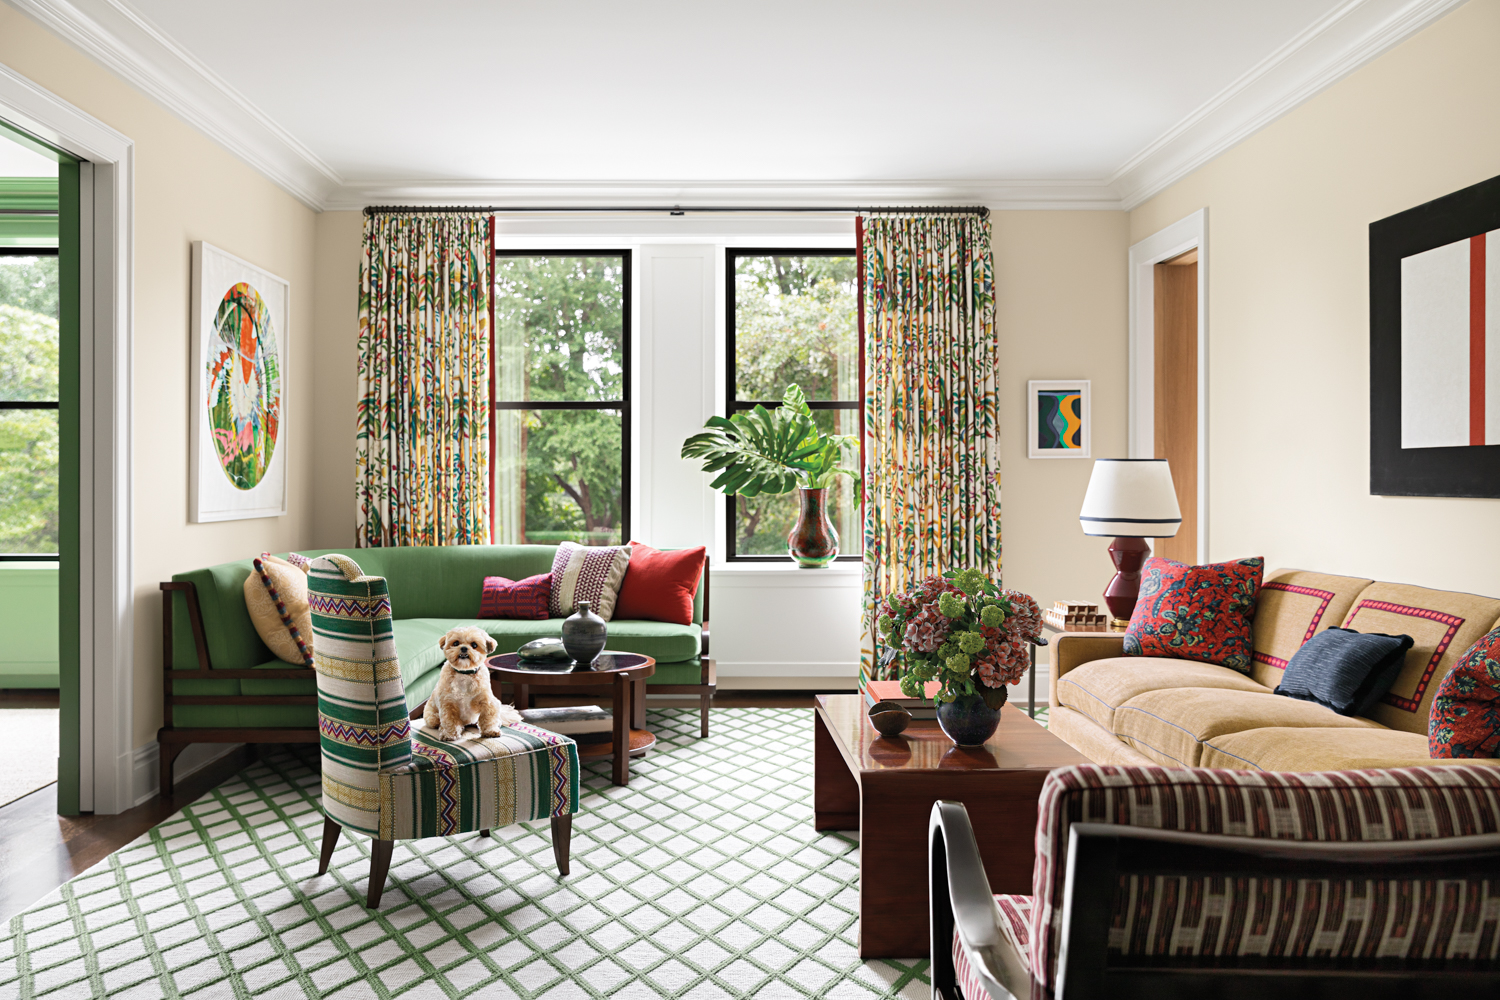 Tour A Colorful Manhattan Flat Nestled In The Central Park Treeline